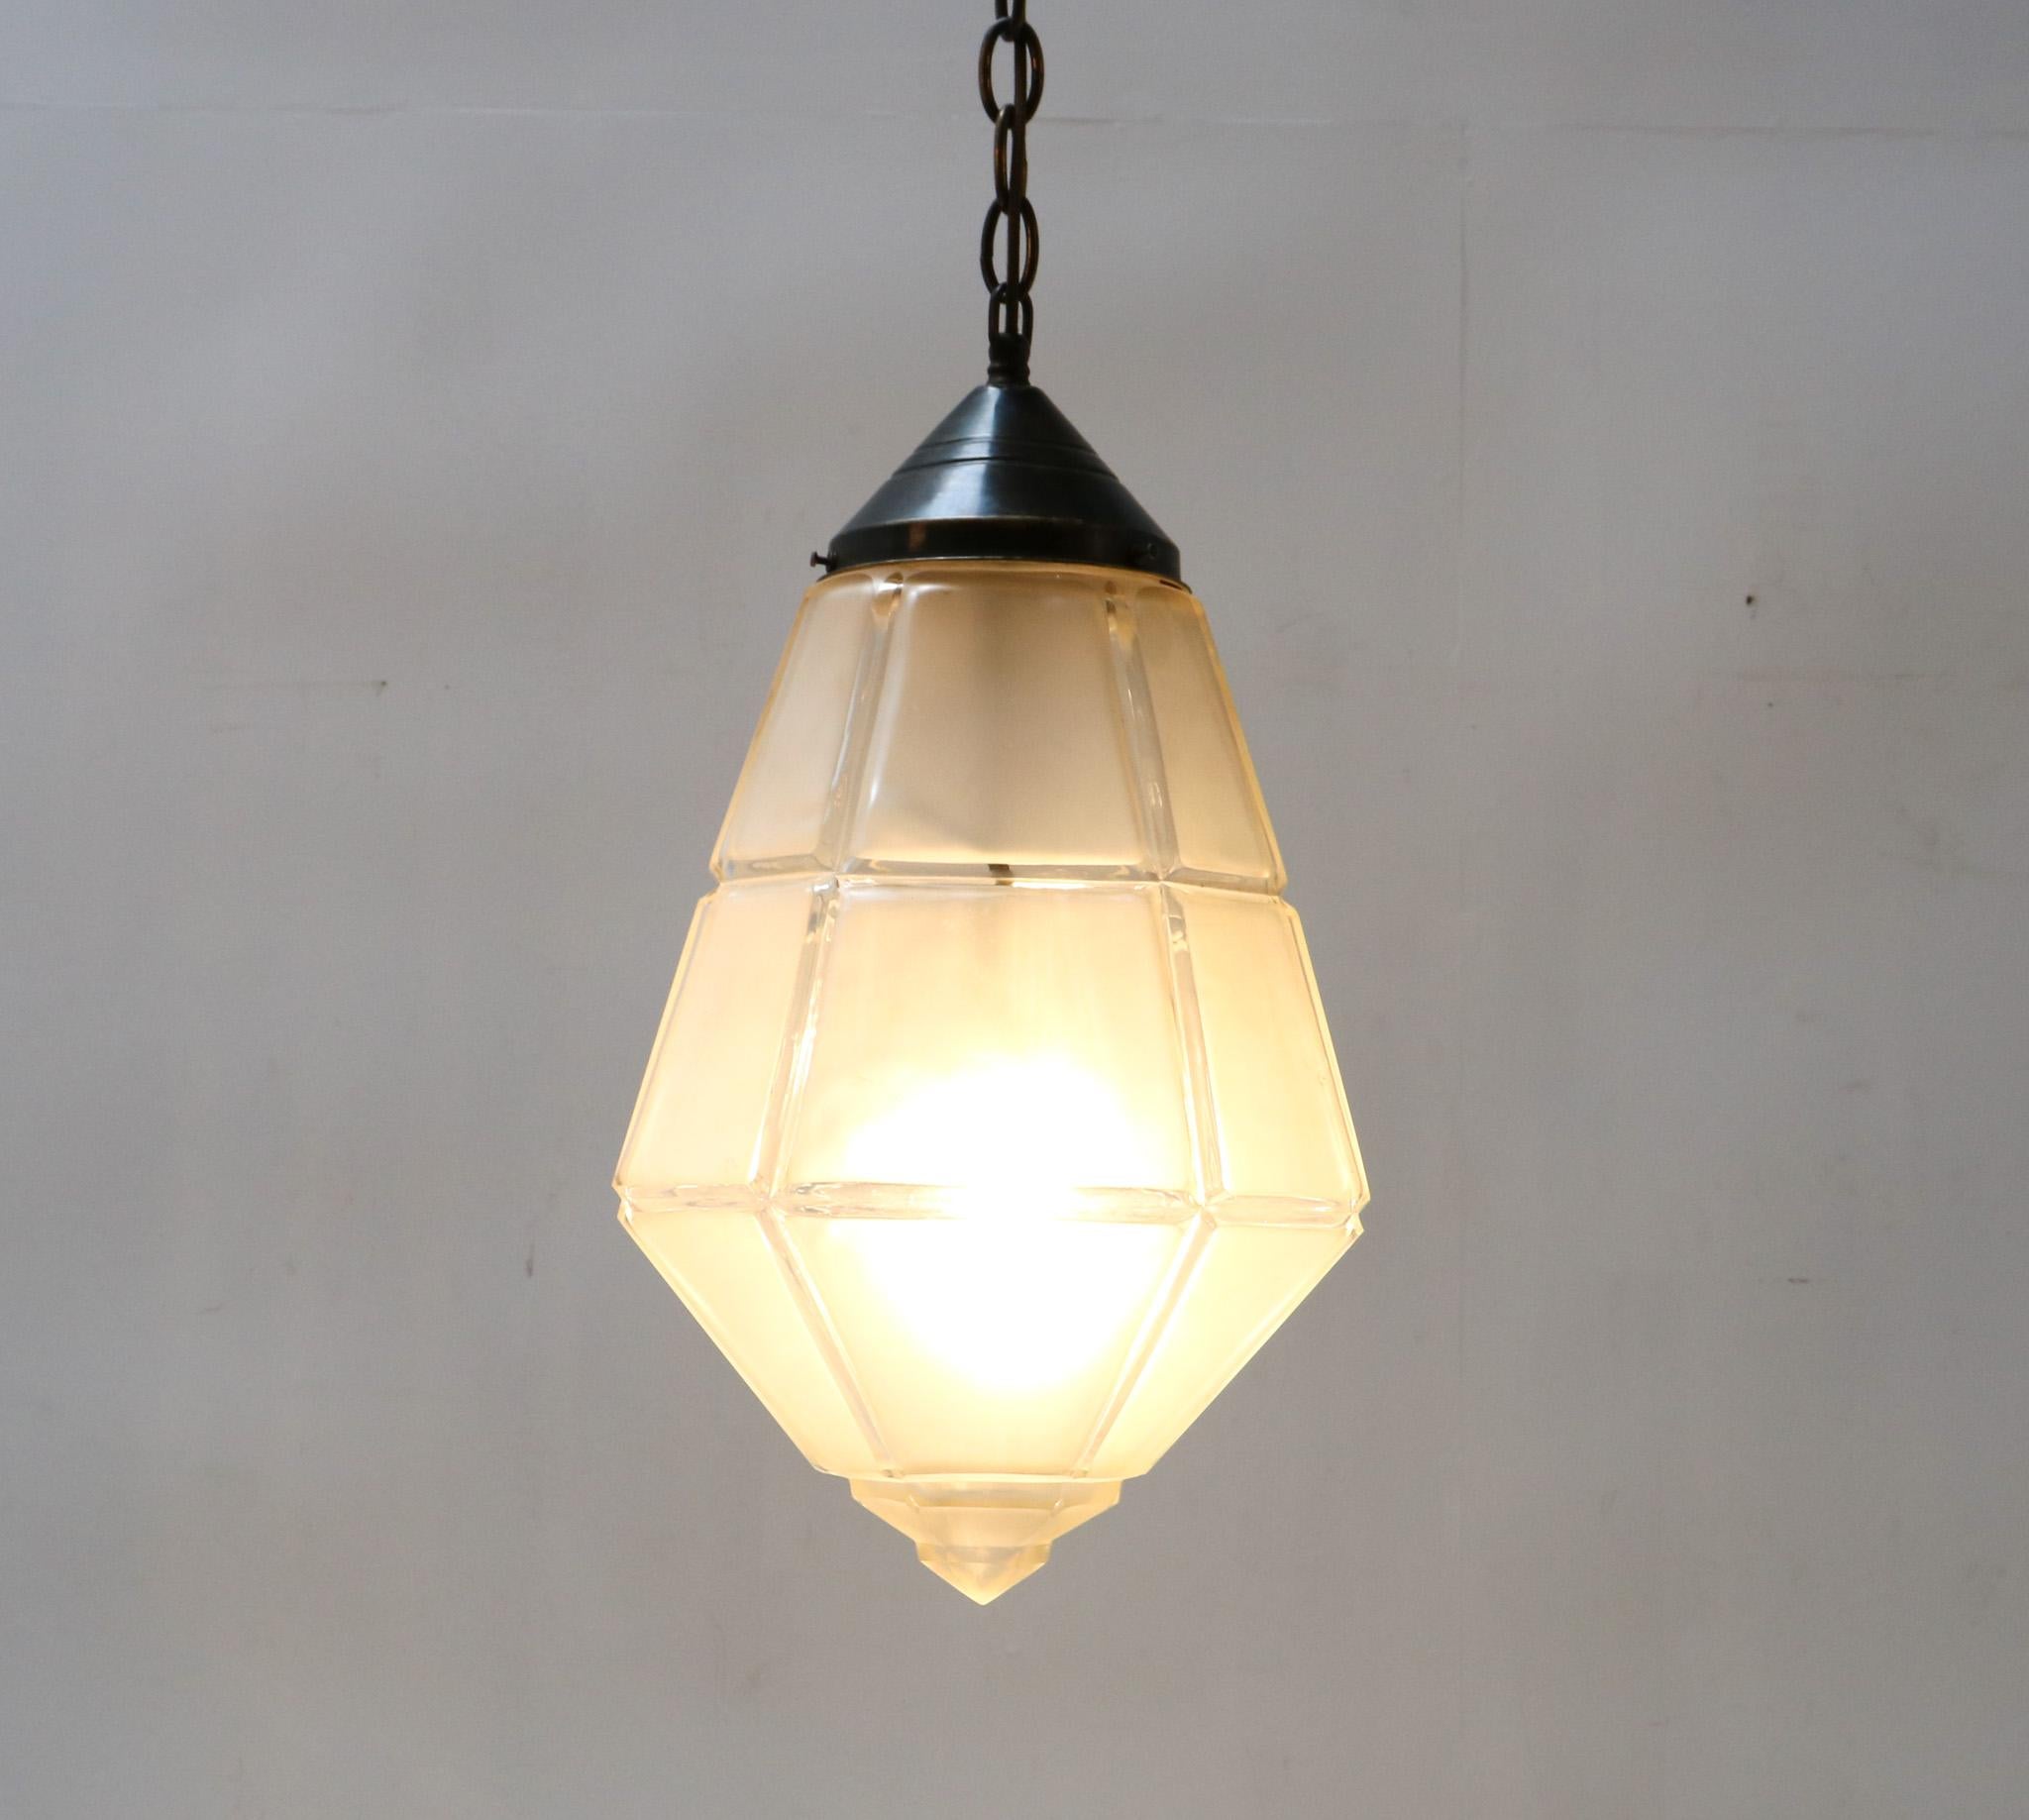 Early 20th Century Brass Art Nouveau Pendant Lamp with XL Shade